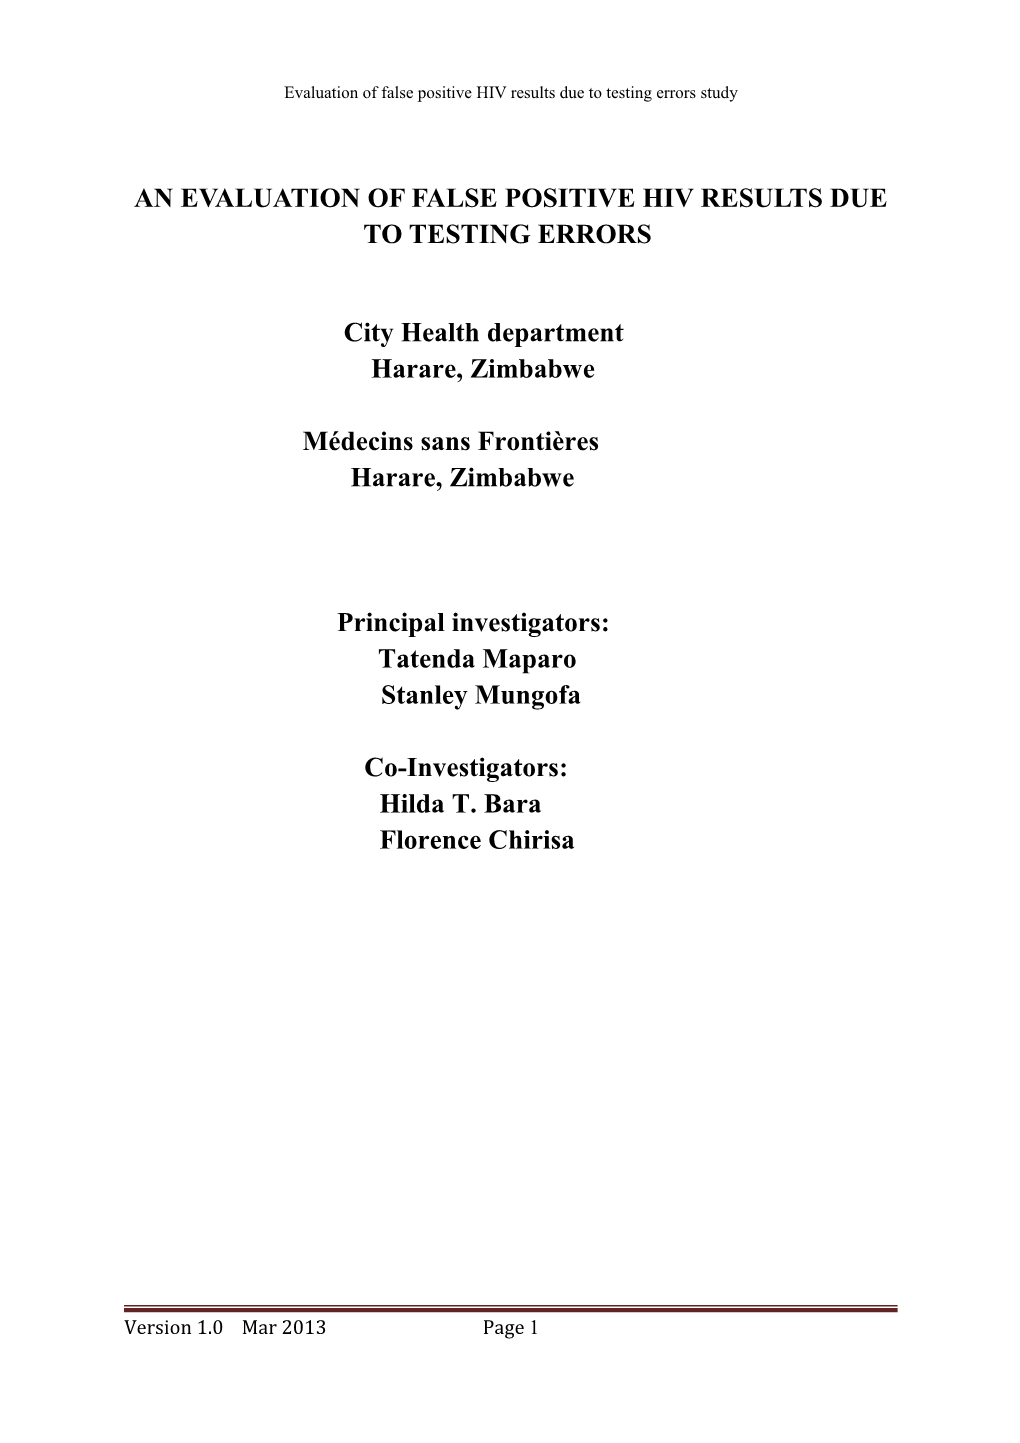 An Evaluation of False Positive Hiv Results Due to Testingerrors